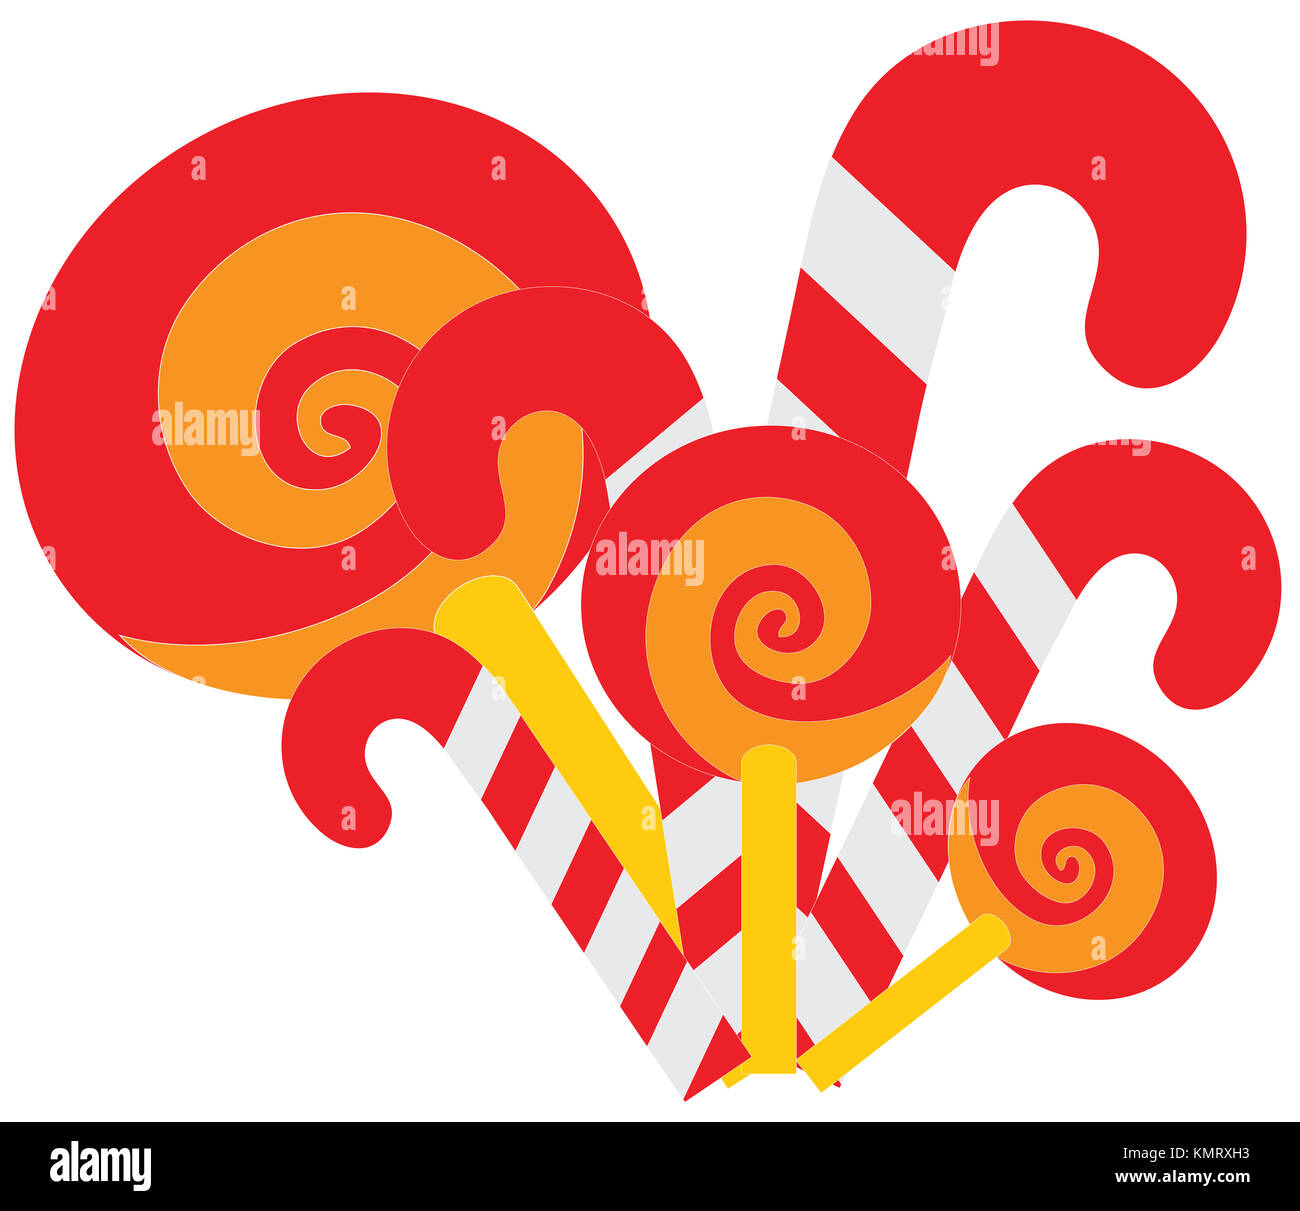 Candy Canes and lollypops or lollipops isolated on white background. Red white and orange candy cane and lollipop or lollypop candies. Traditional Chr Stock Photo